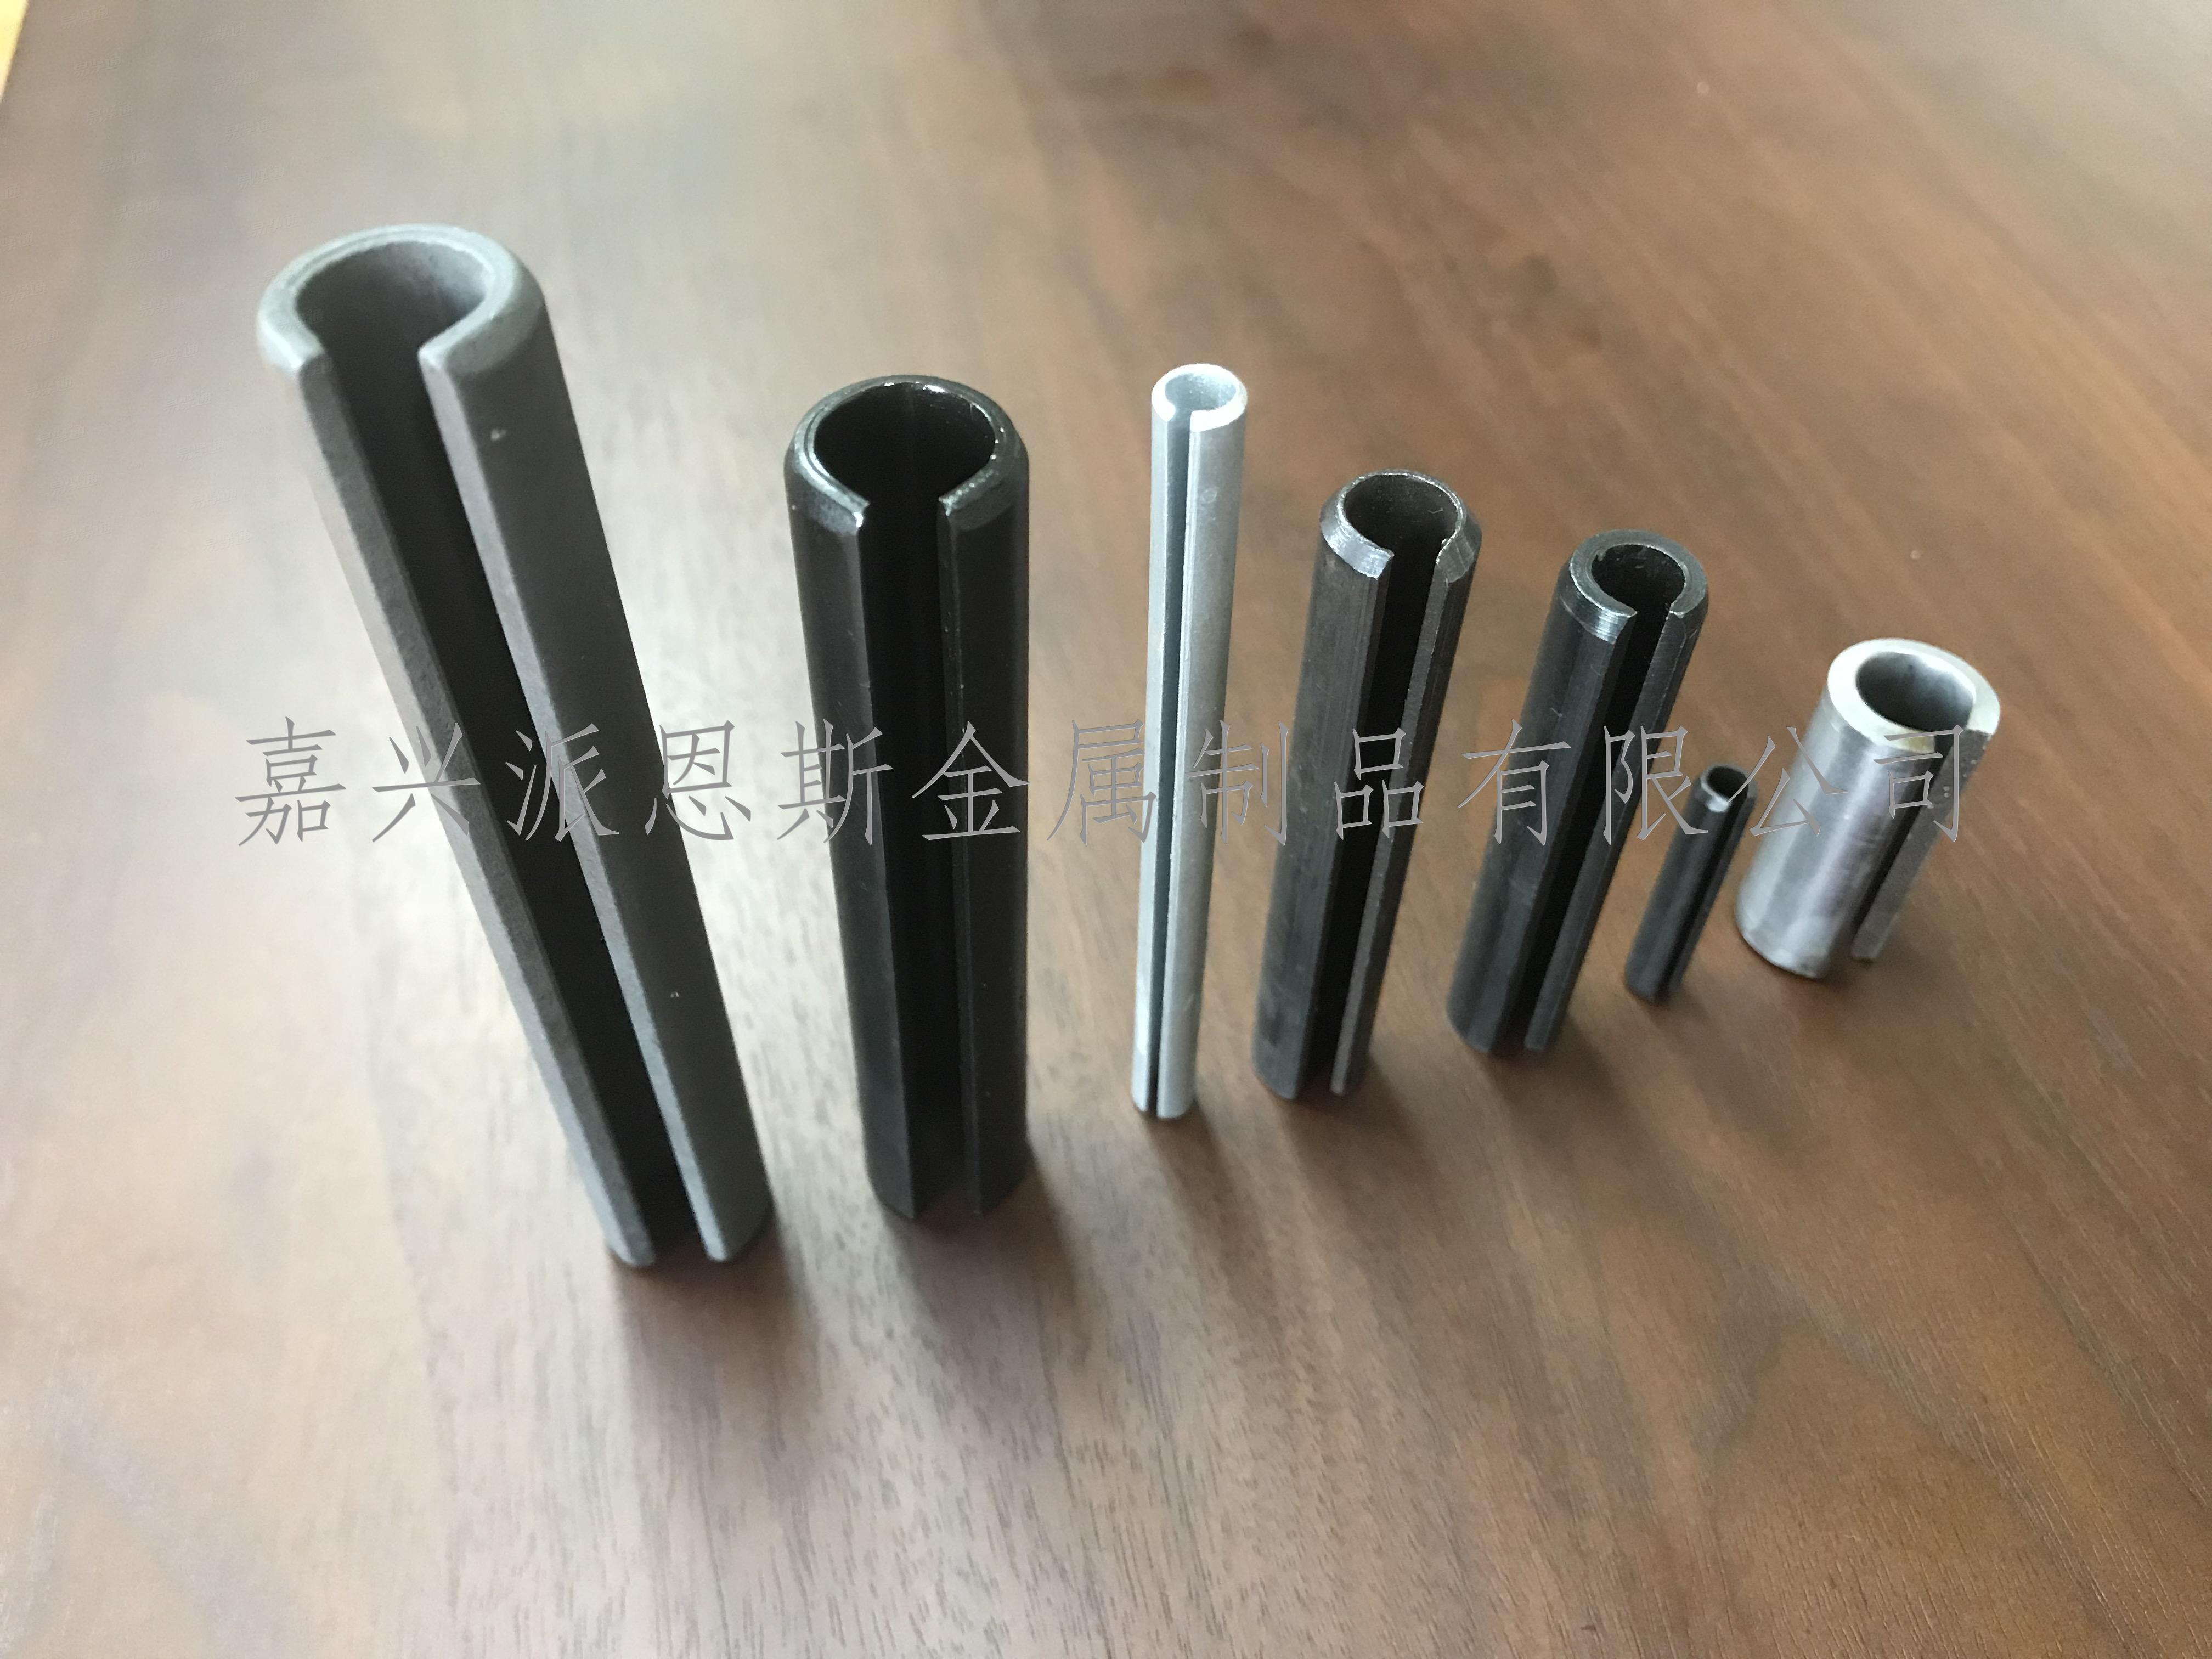 Spring-type straight pins – Slotted, light duty